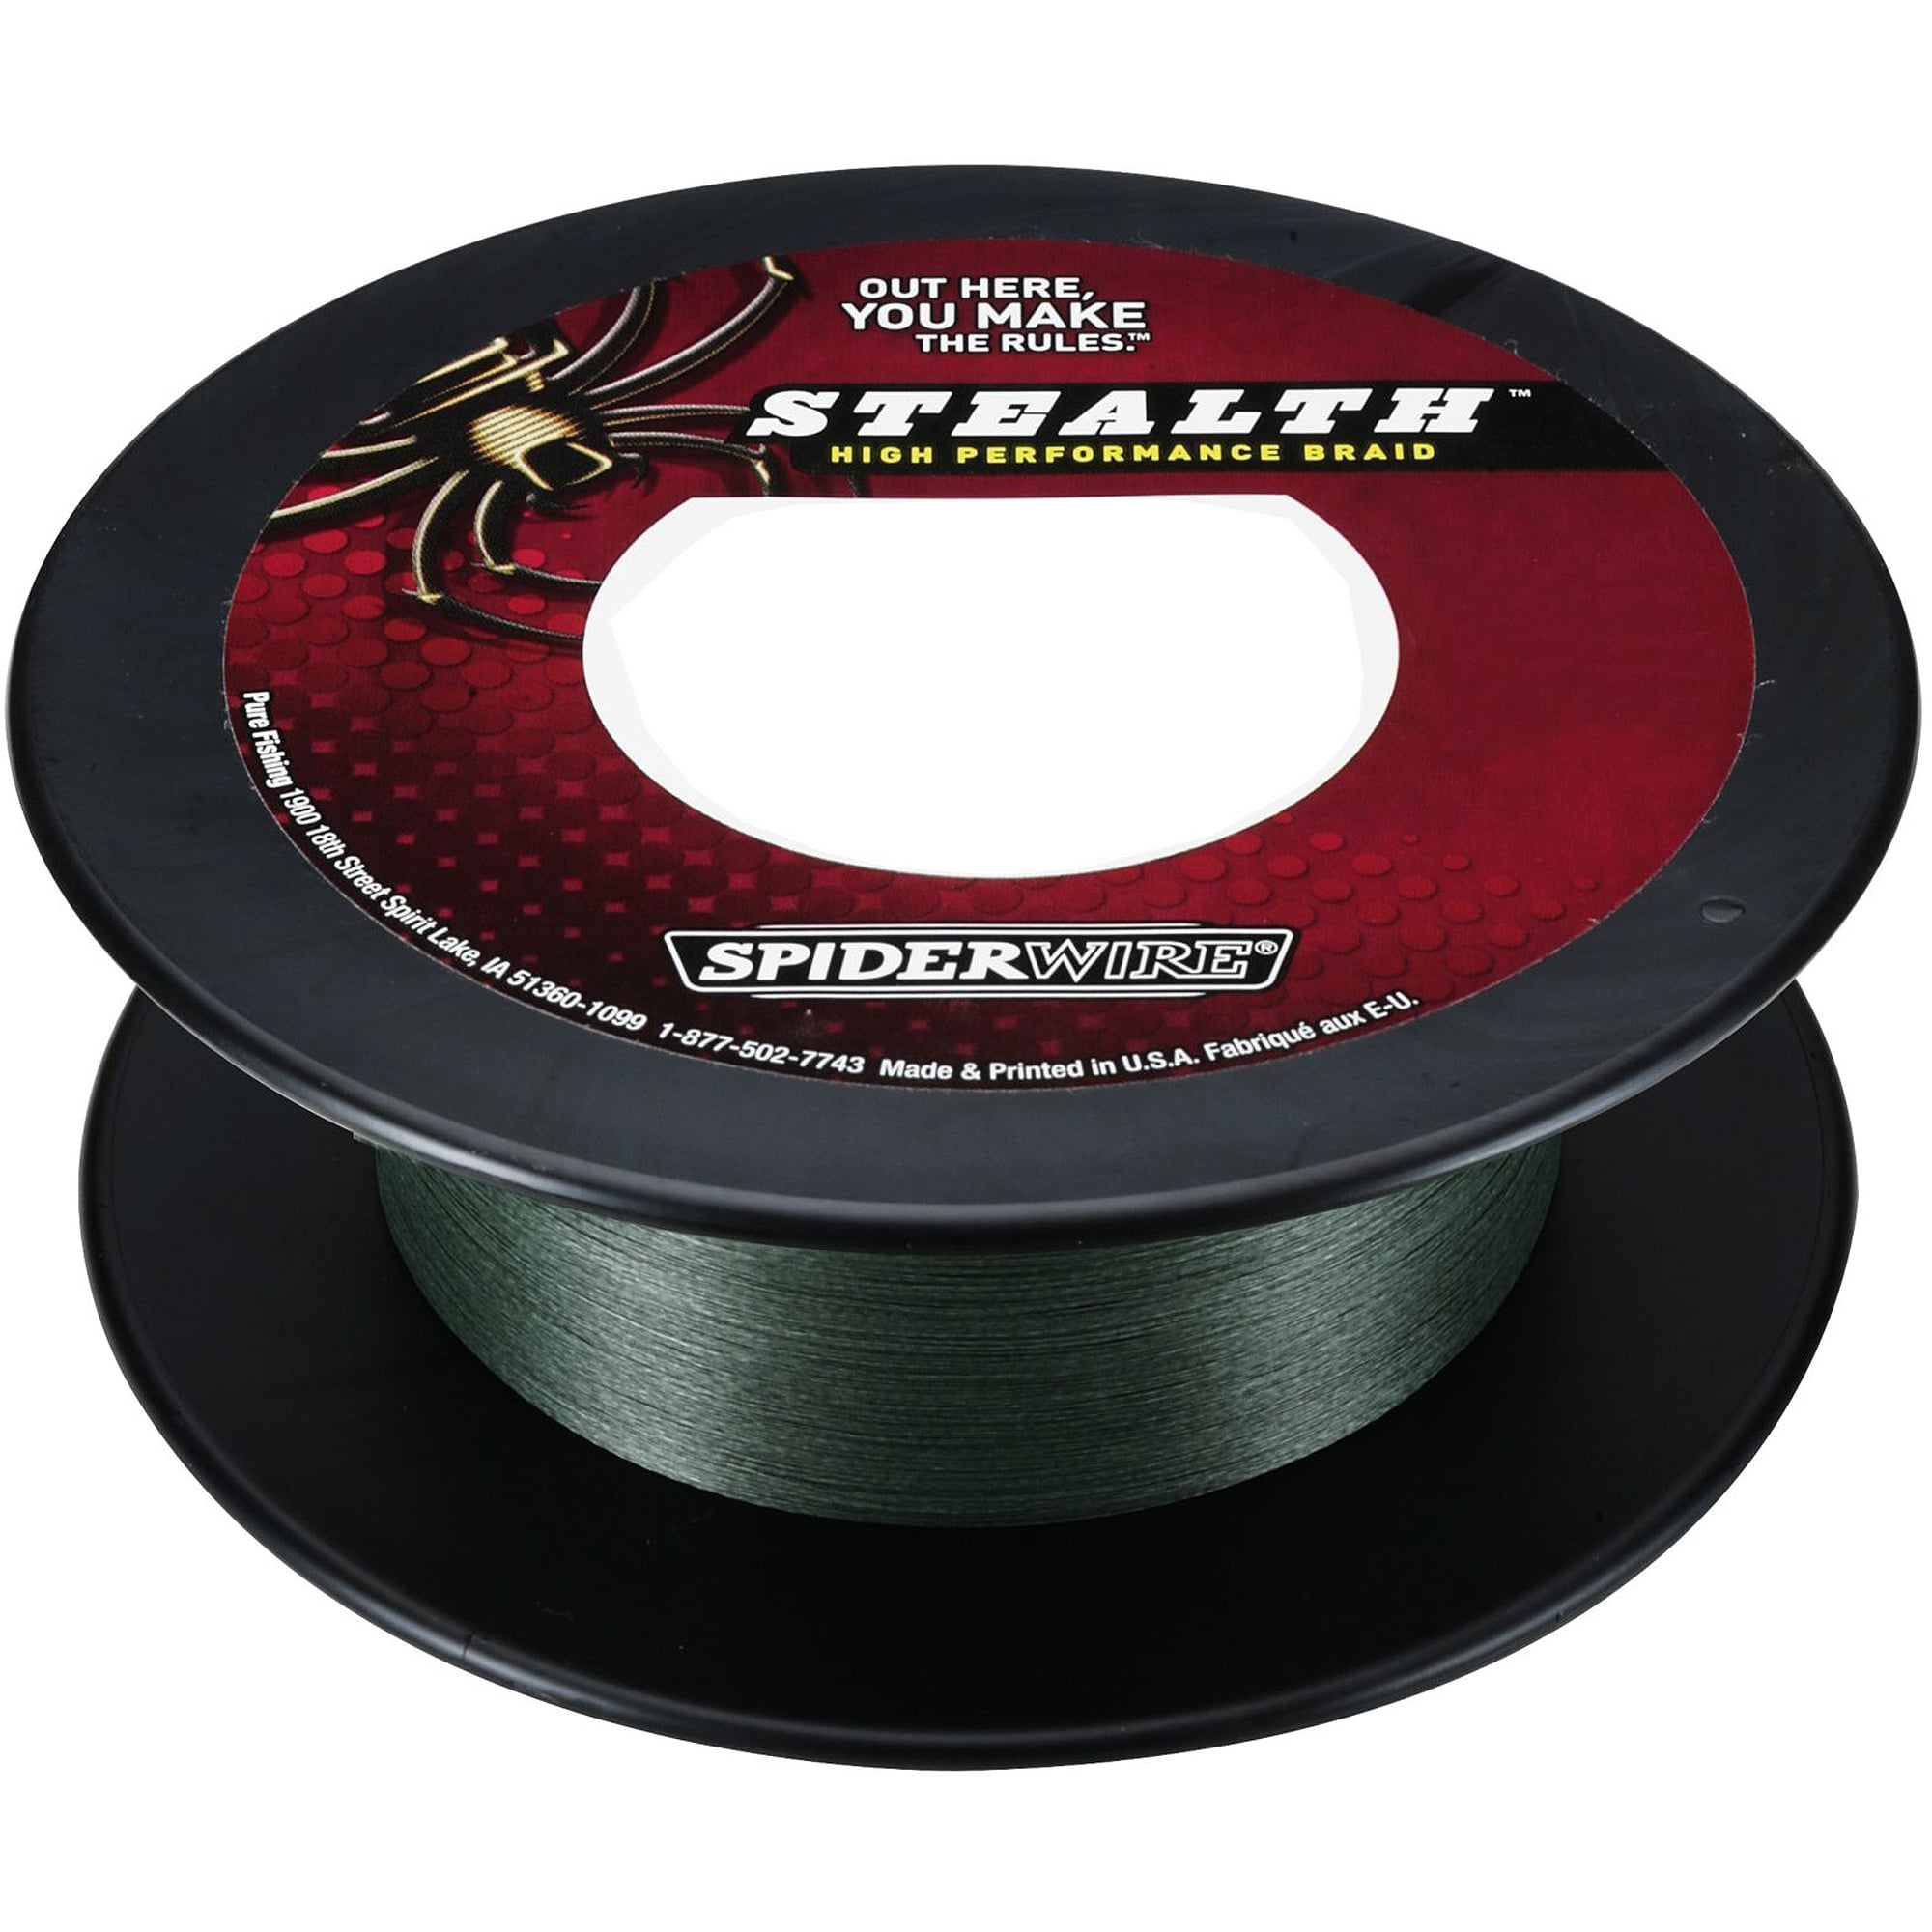 Spiderwire Stealth Braid Fishing Line (500 yds) - 20 lb Test - Moss